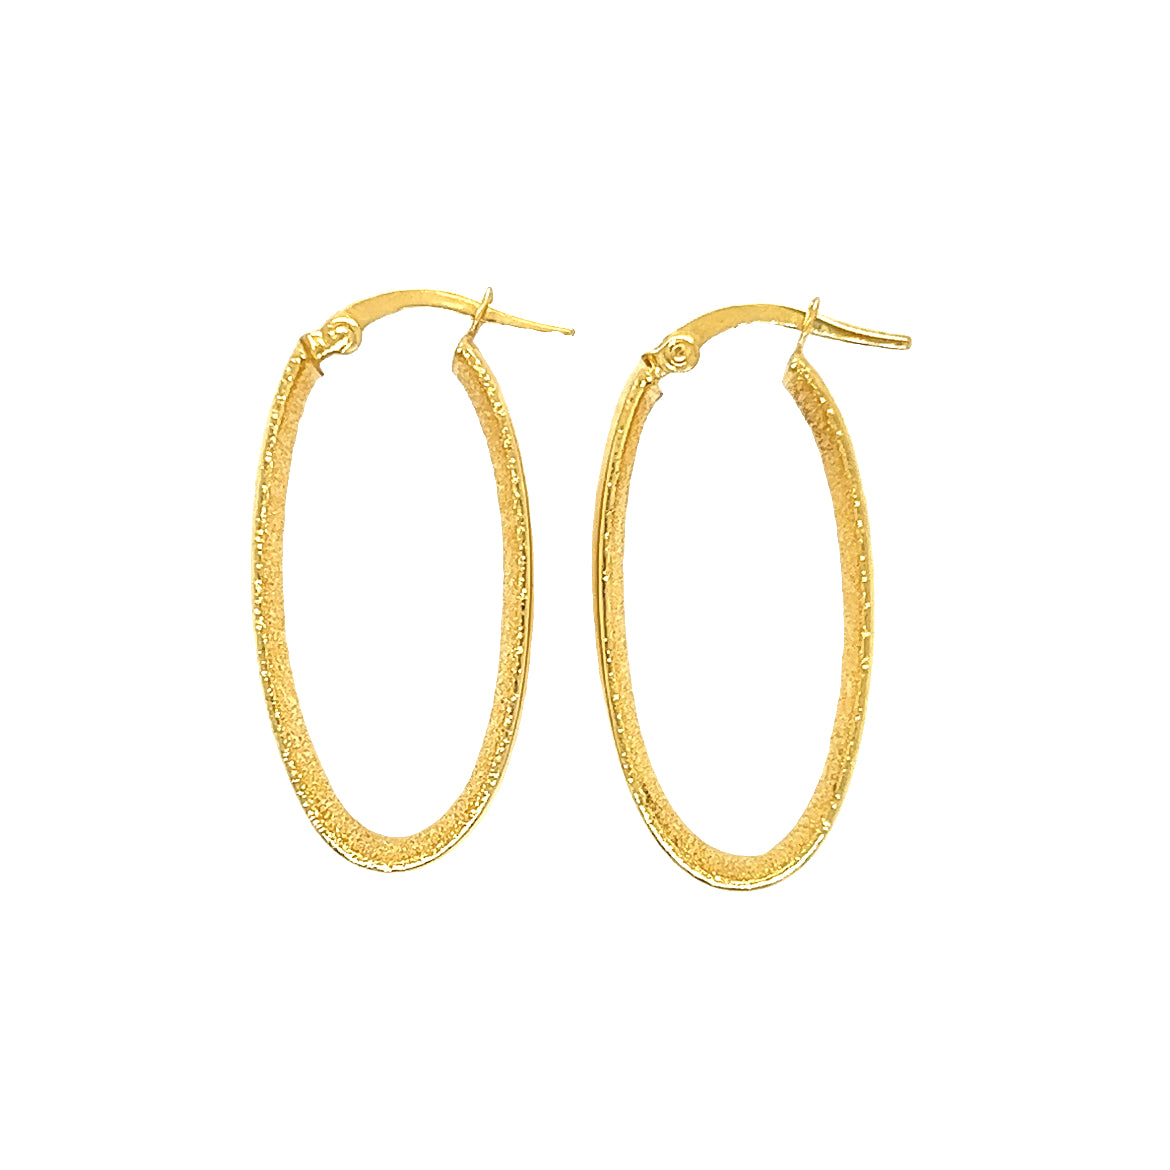 Oval Hoop 6mm Earrings with Star Dust Finish in 14K Yellow Gold Top View Closed Clasp